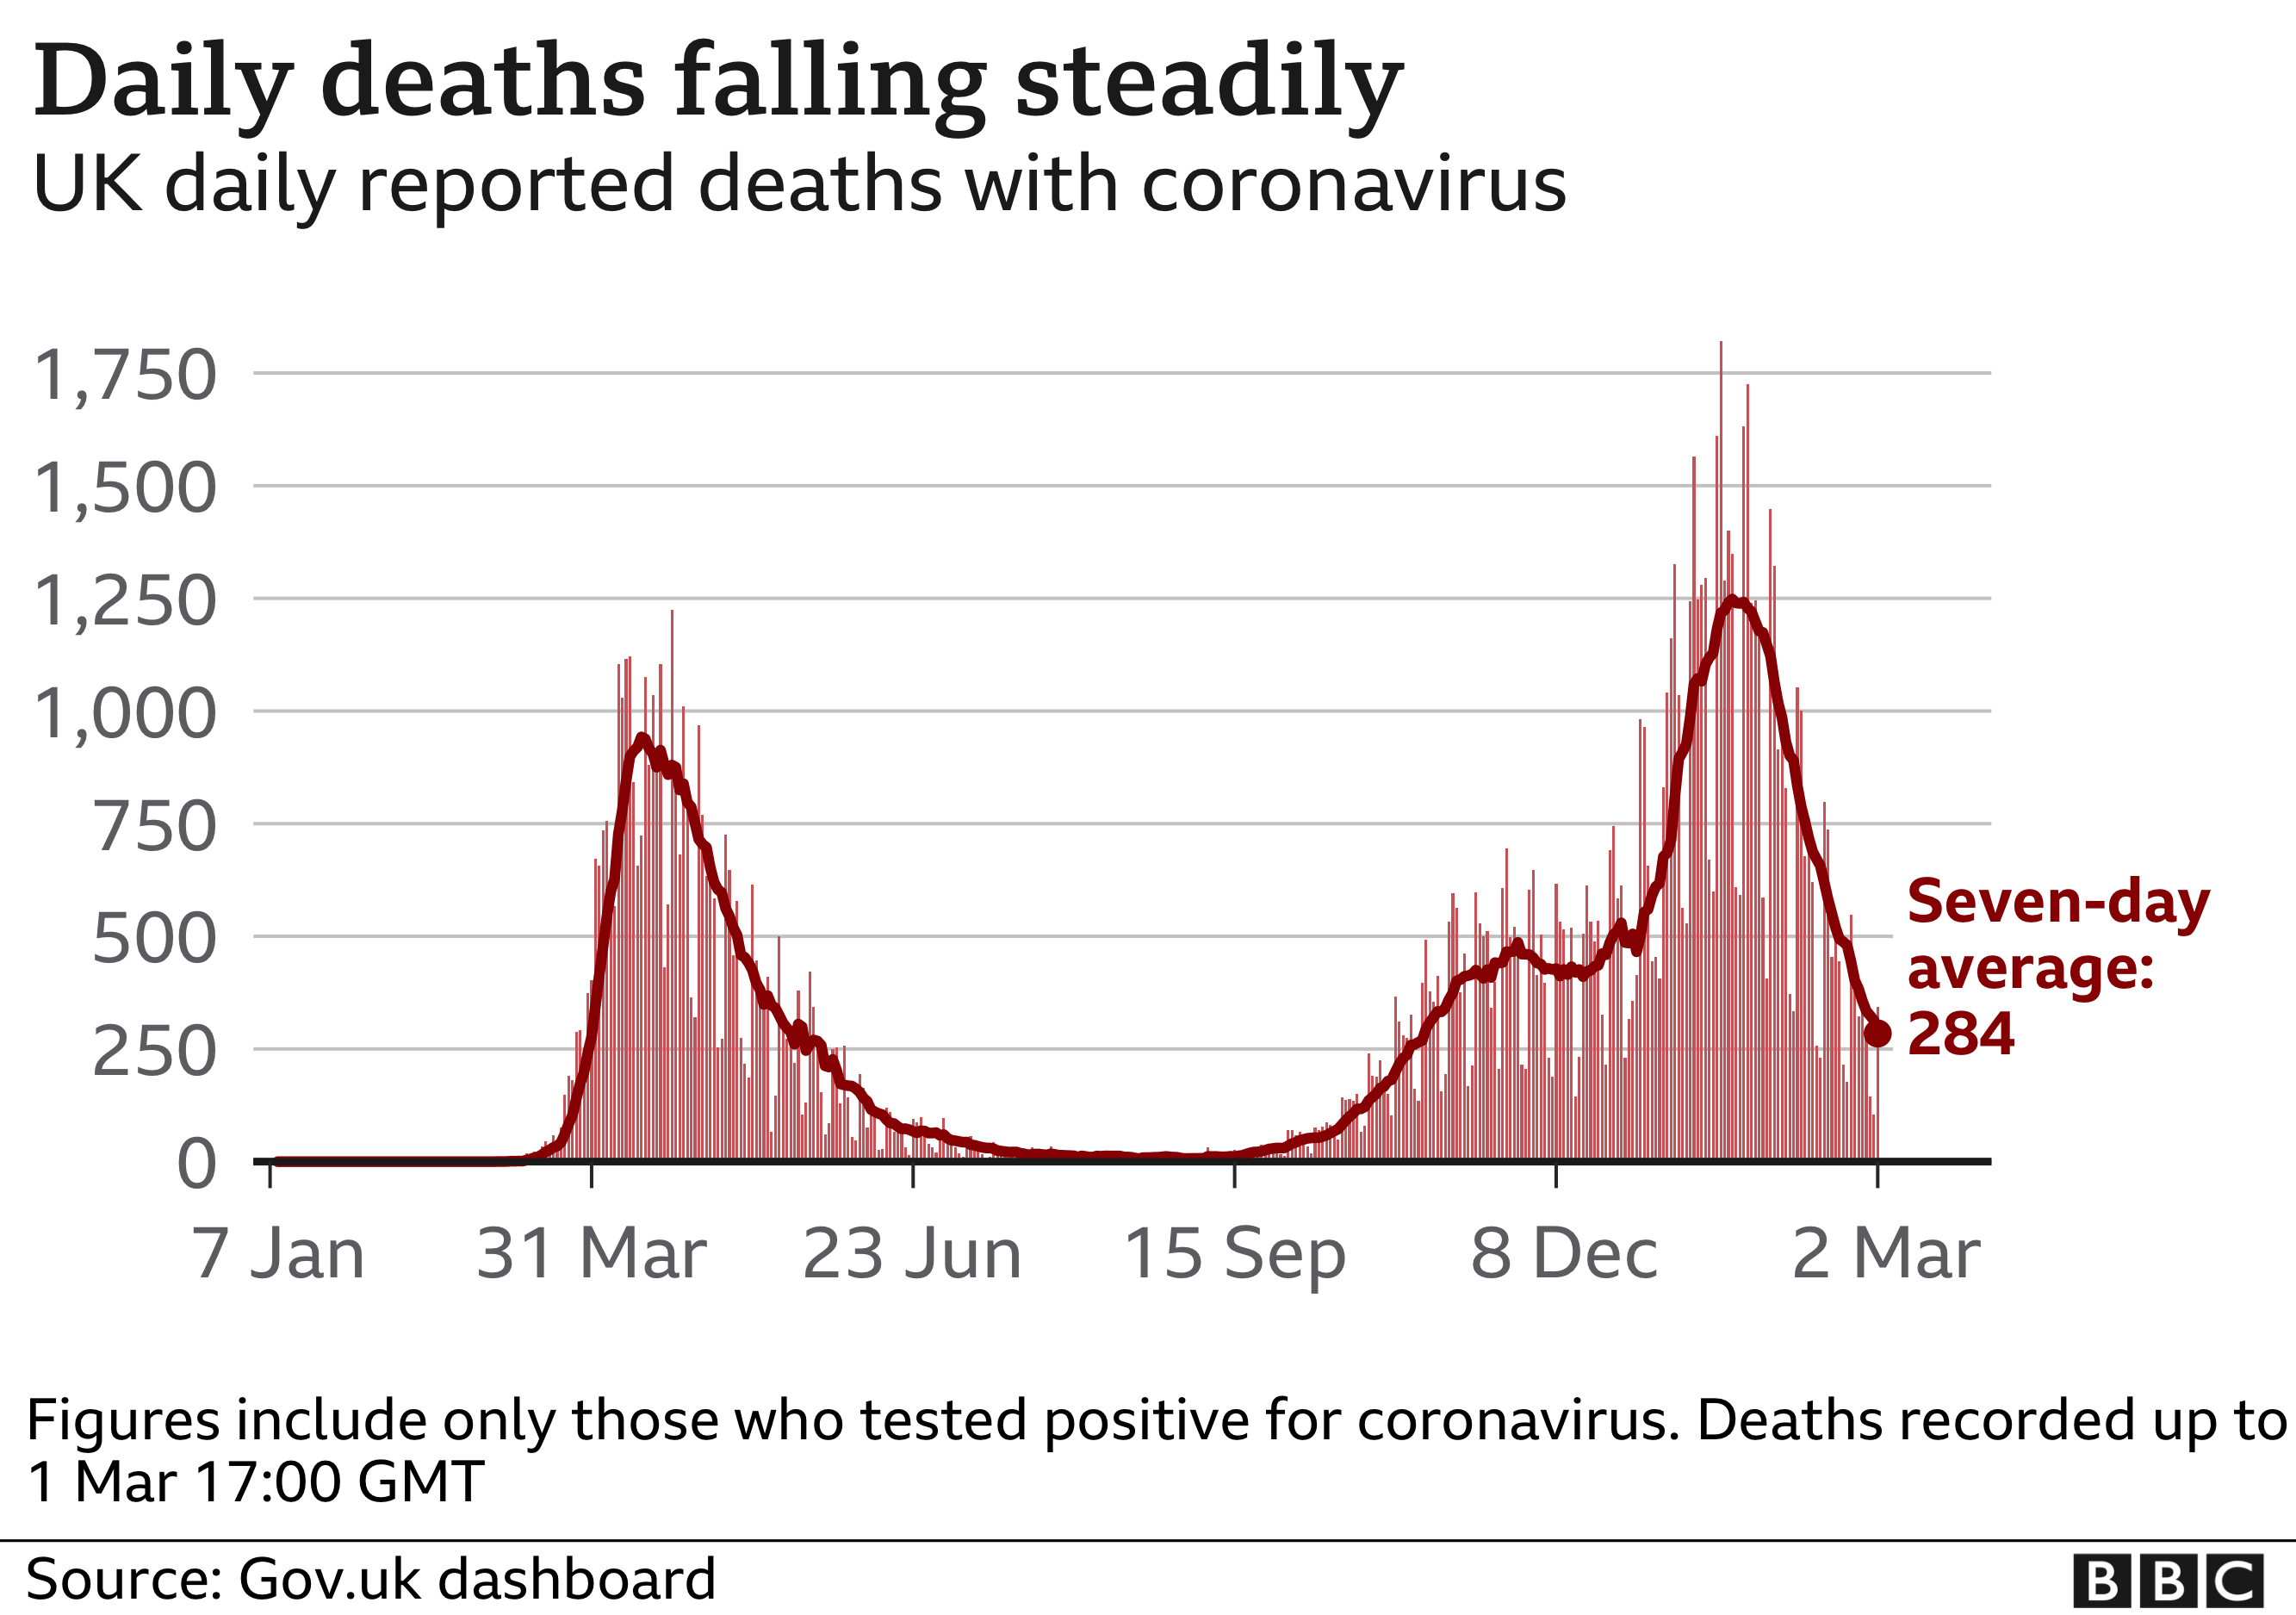 Chart showing daily deaths are falling steadily. Updated 2 Mar.